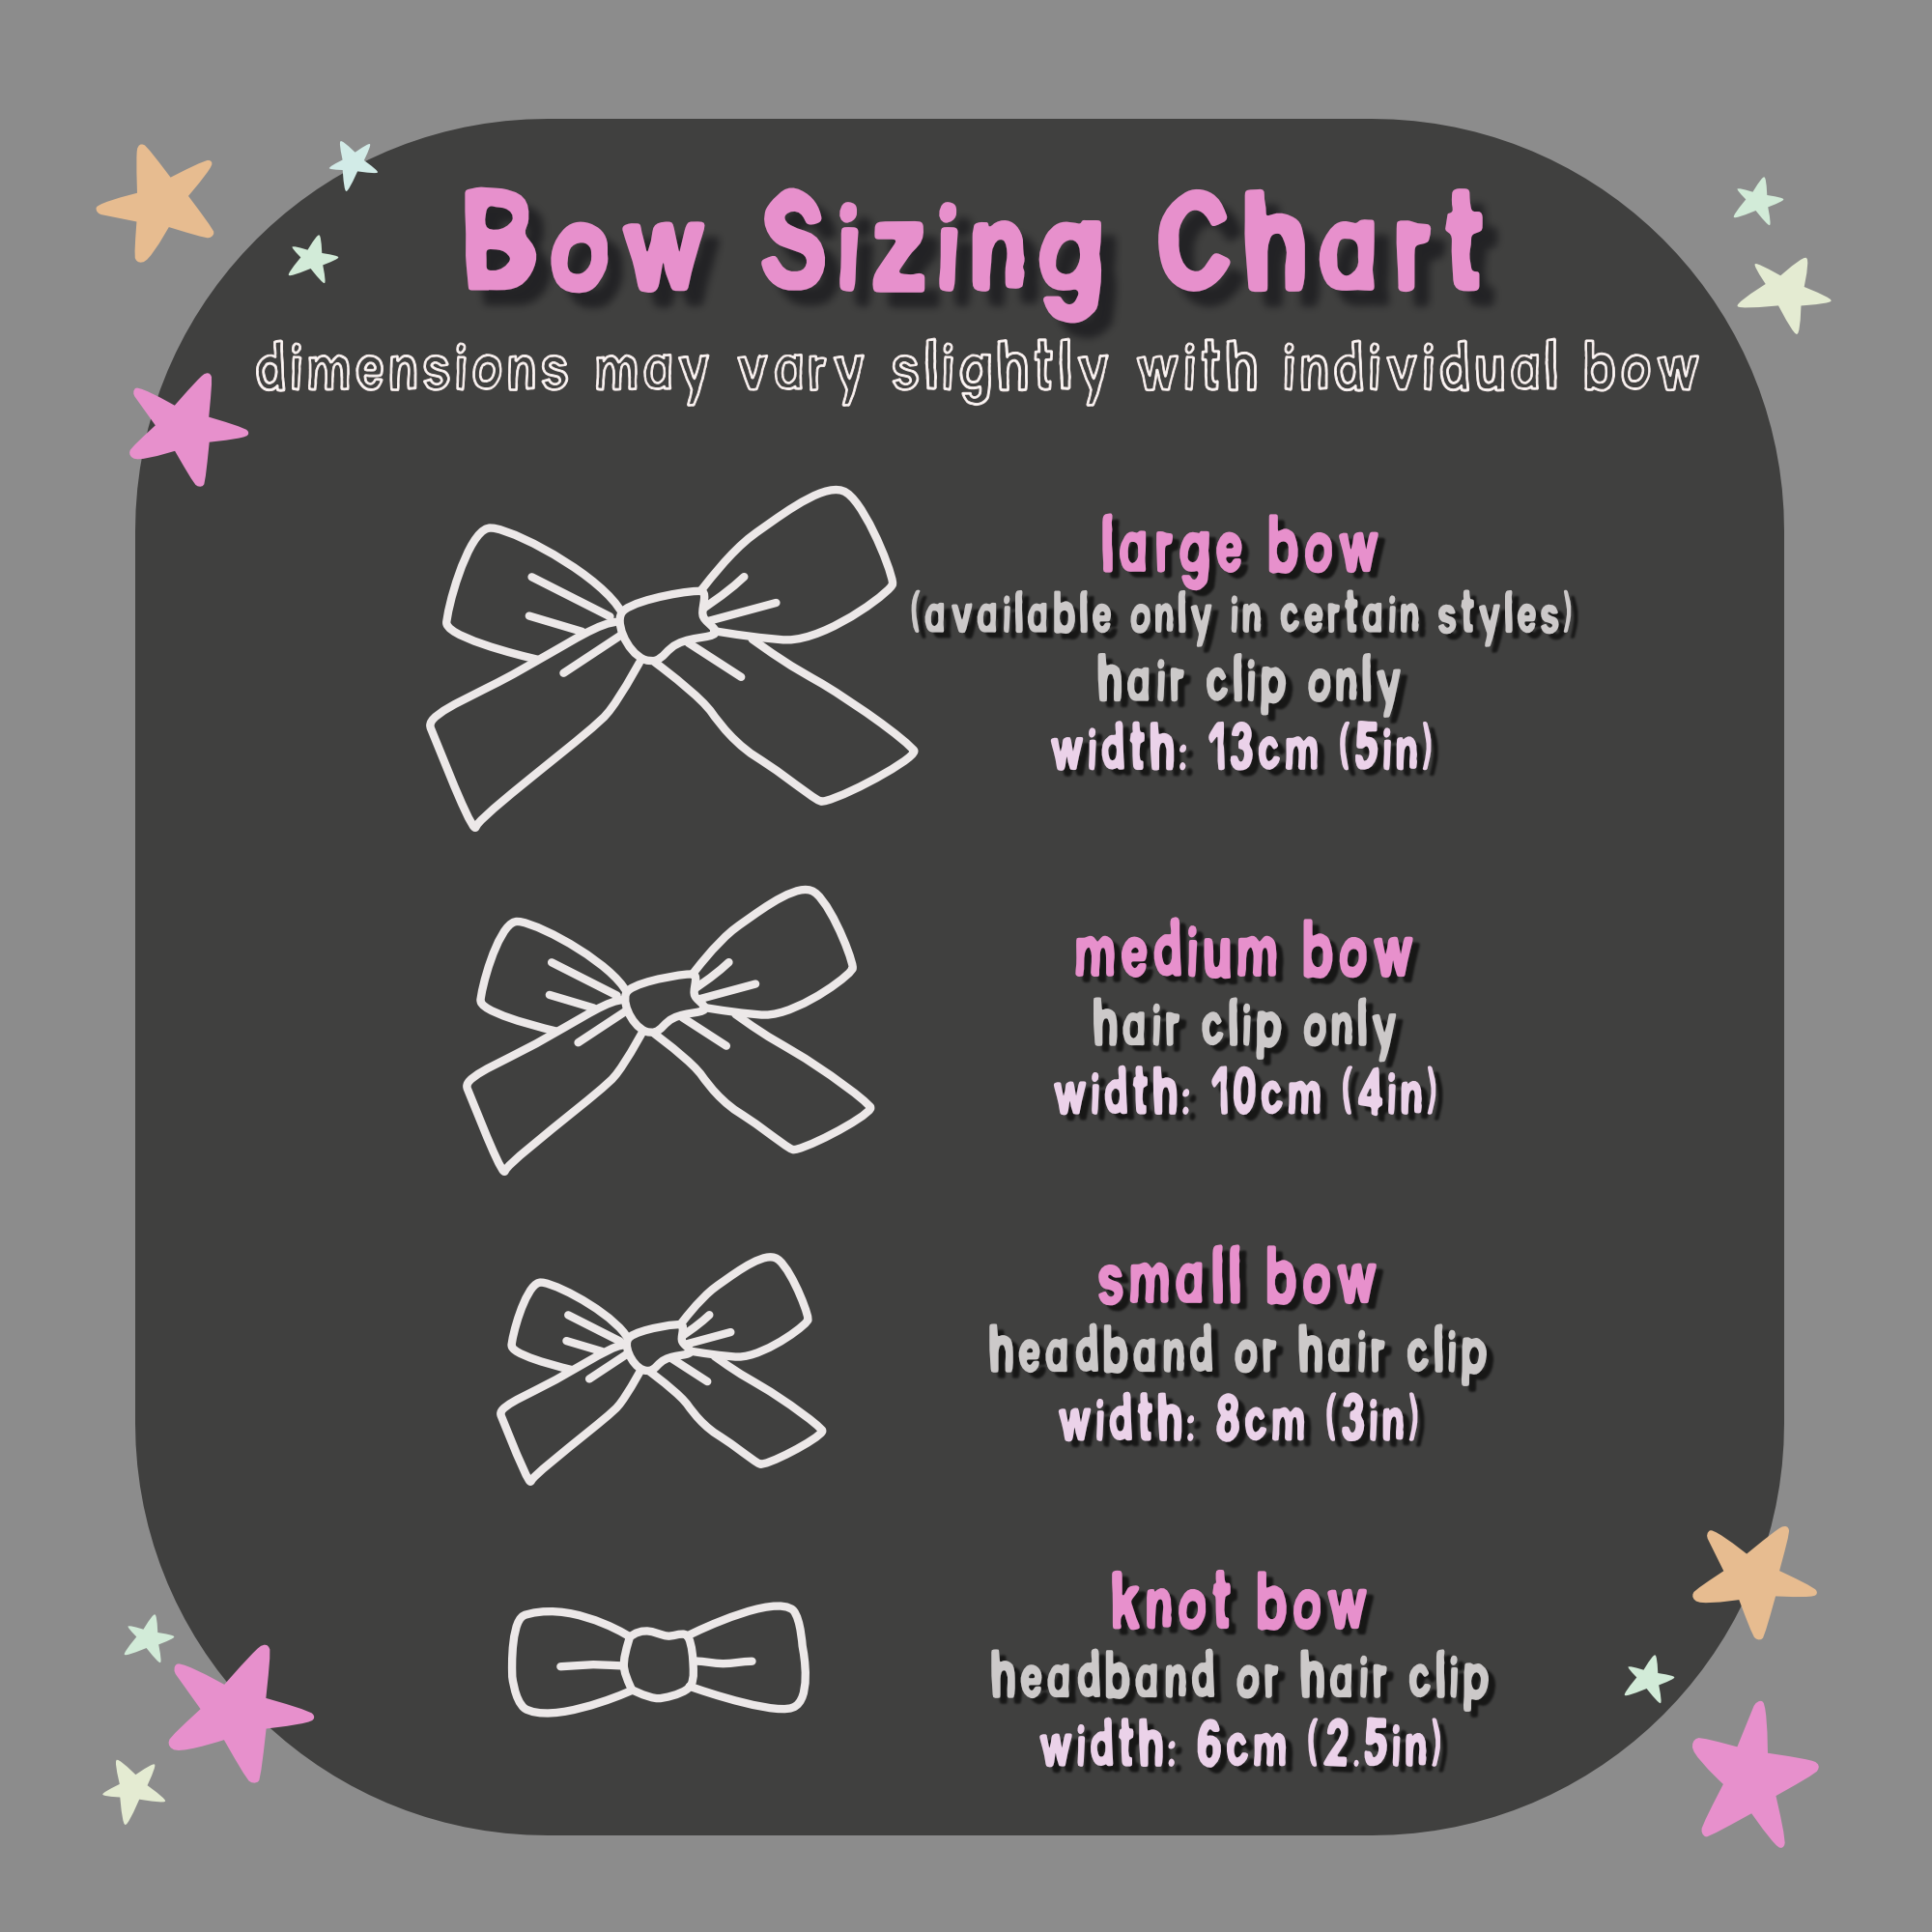 Hair bow sizing chart with sizes varying from large, medium, small and knot type.